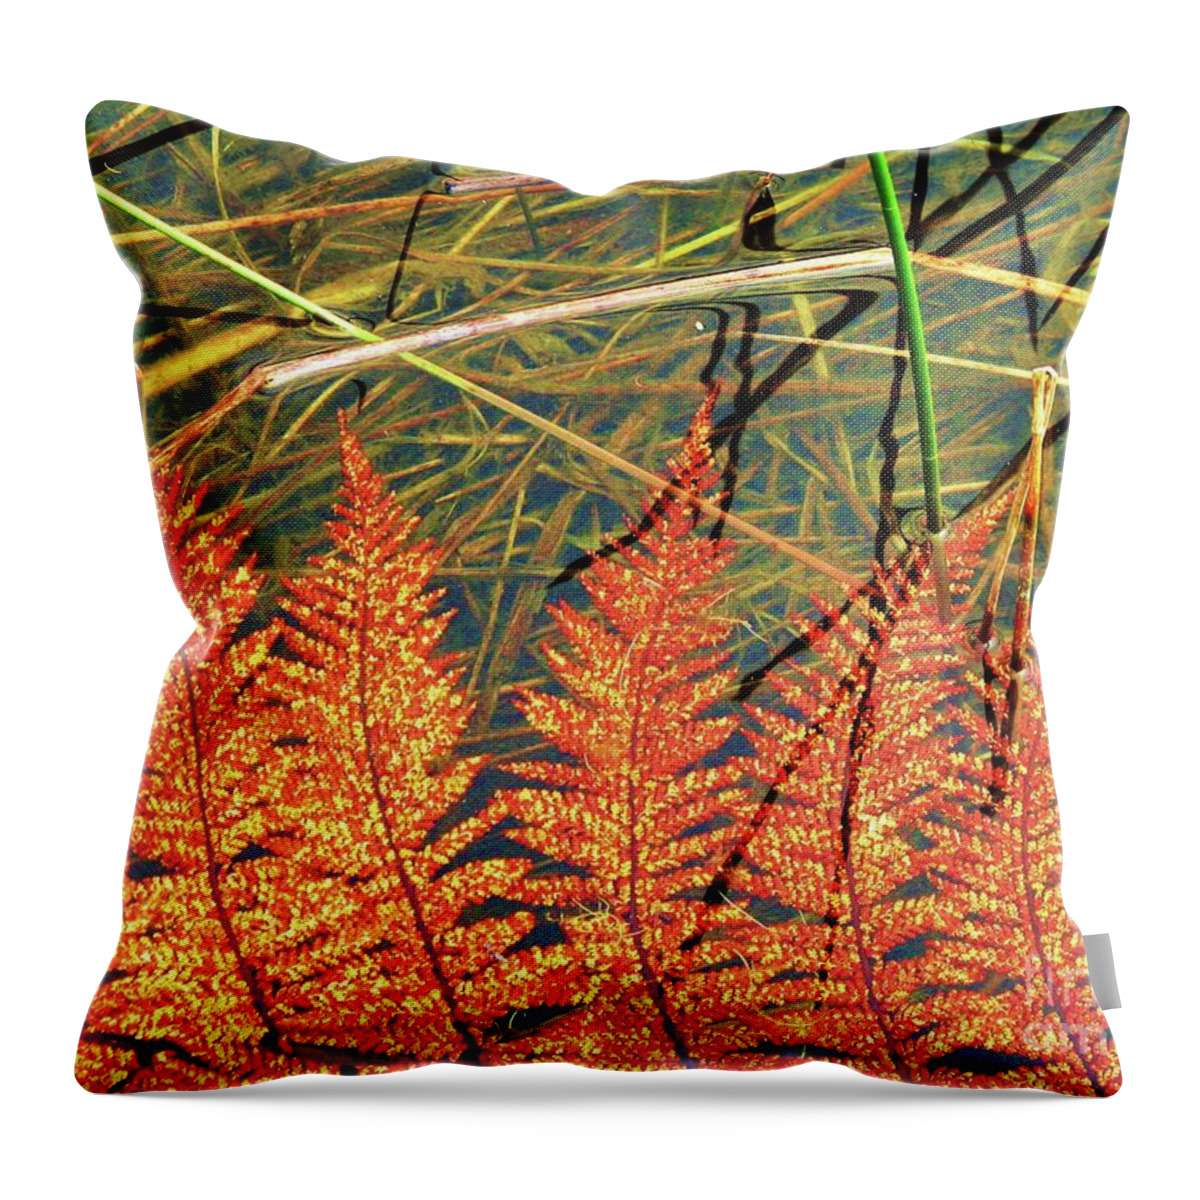 New Zealand Throw Pillow featuring the photograph Lagoon Fern by Michele Penner